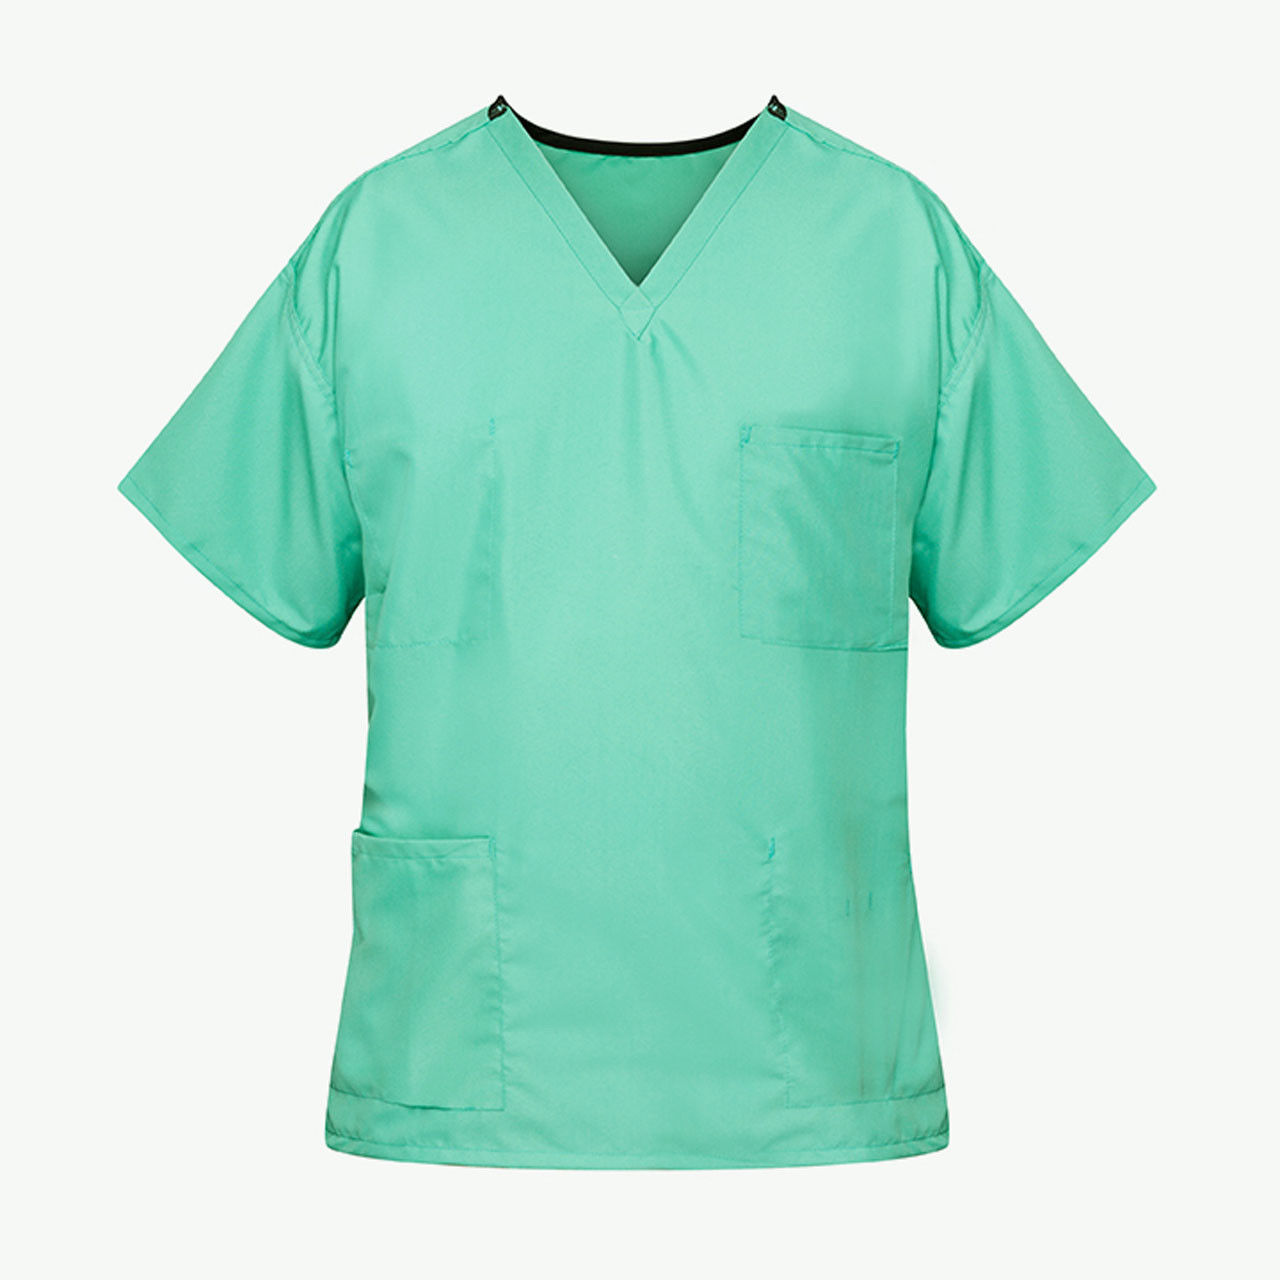 What fabric is used for these Jade Green Scrub Tops?